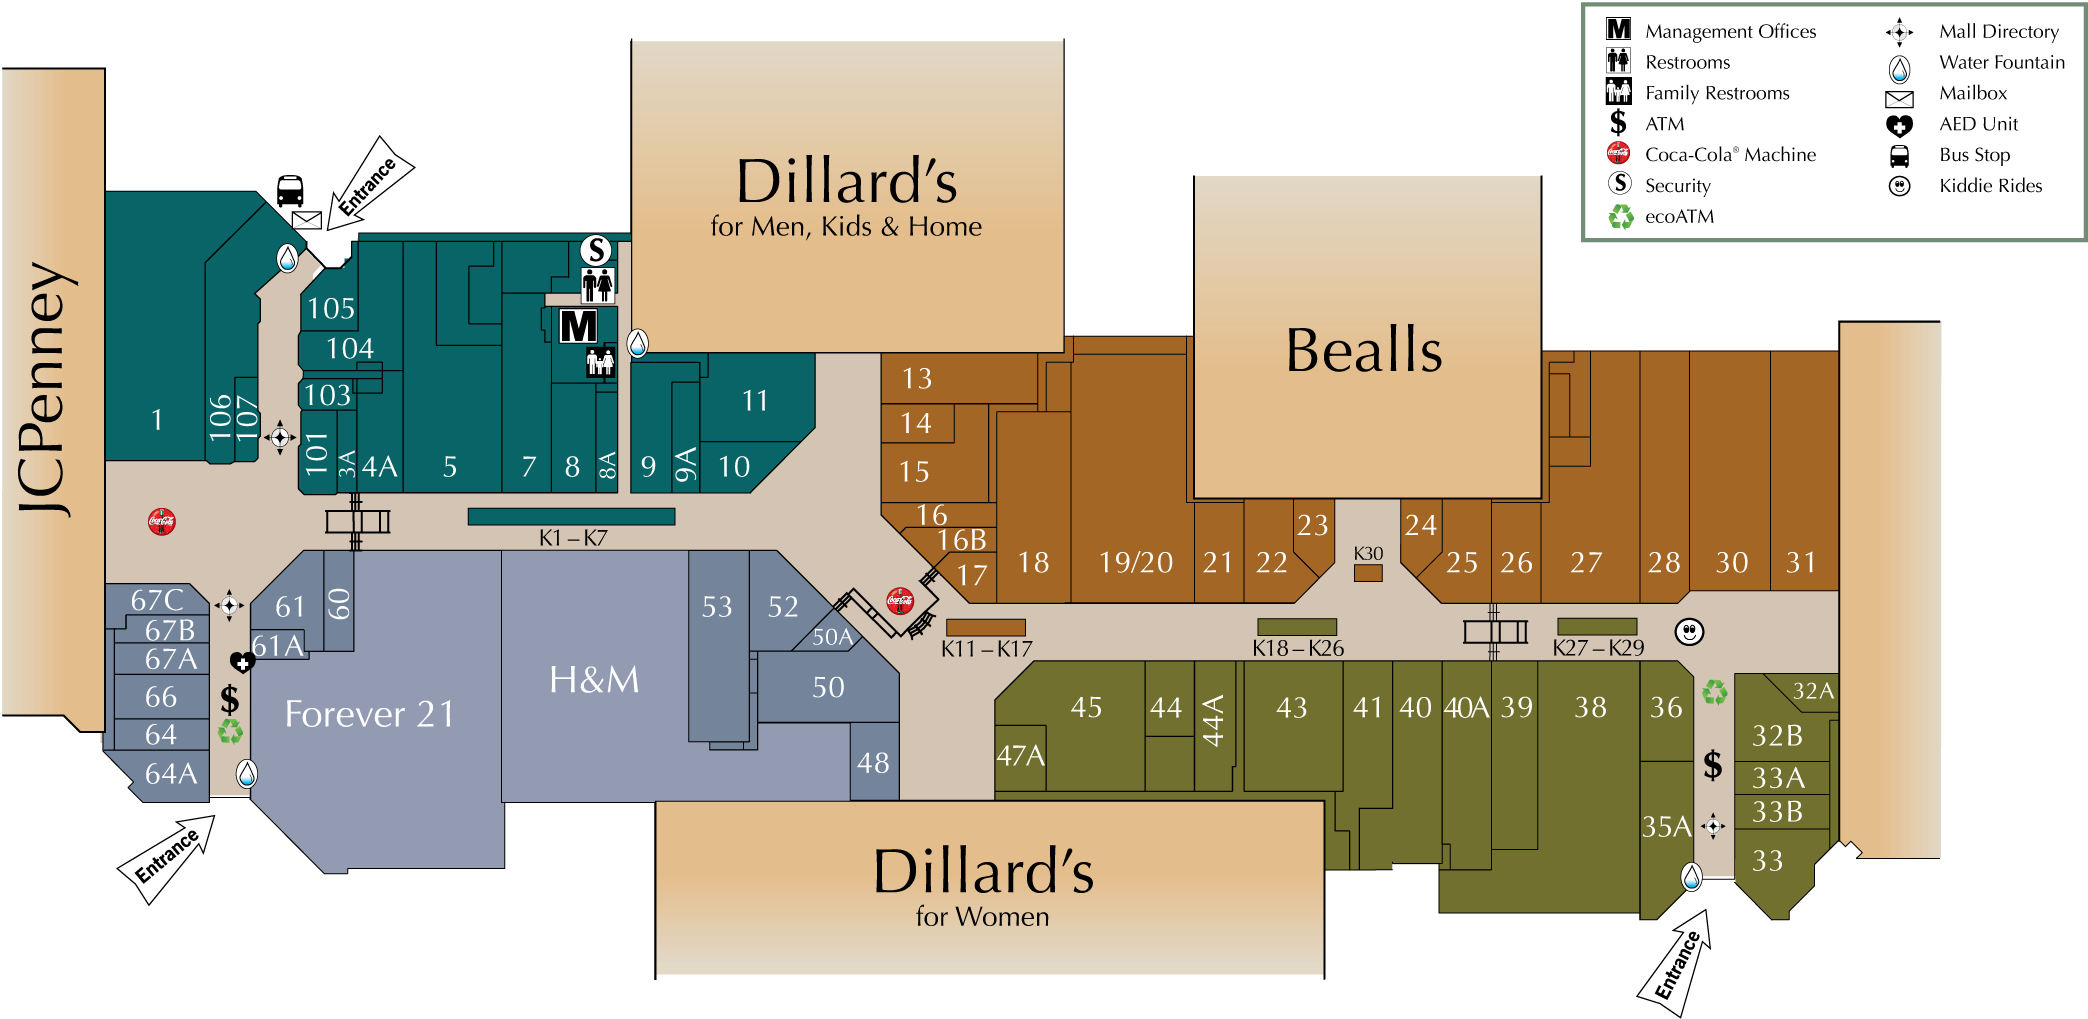 franklin park mall map Mall Directory Richland Mall franklin park mall map